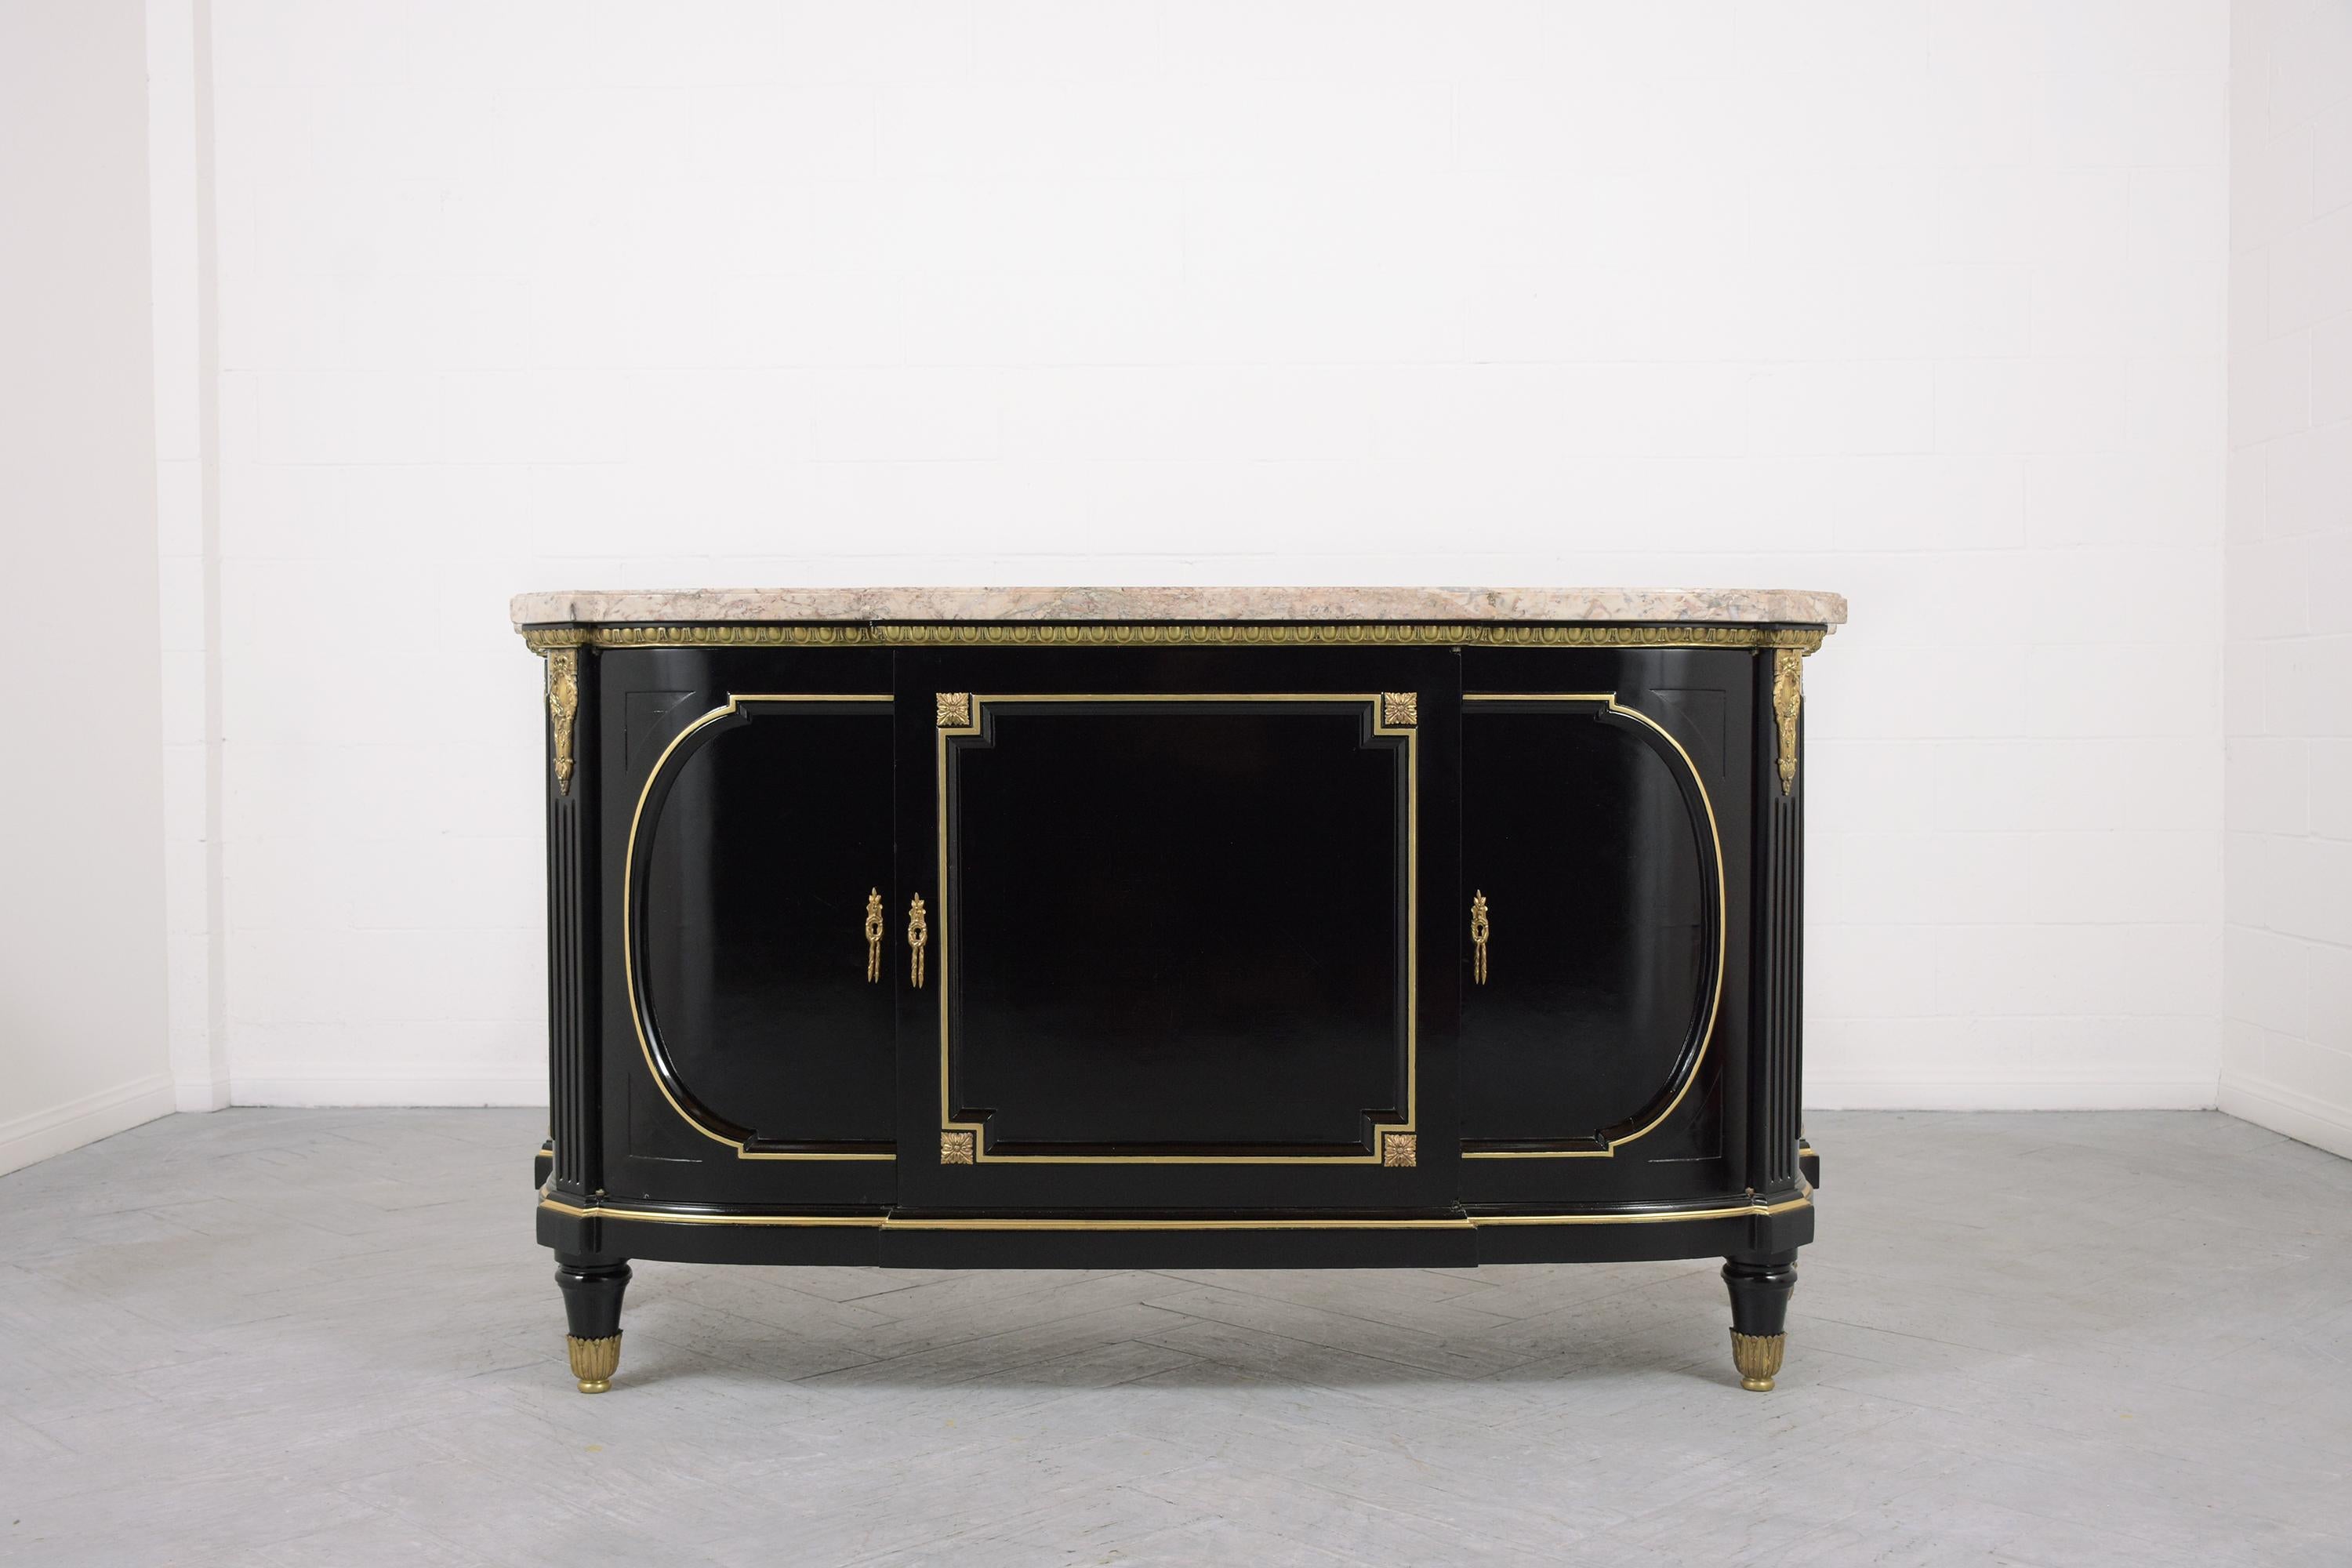 This extraordinary antique french ebonized mahogany Louis XVI buffet is hand-crafted out of mahogany wood, is in great condition, and has been professionally restored by our team of craftsmen in the house. This fabulous credenza features it's